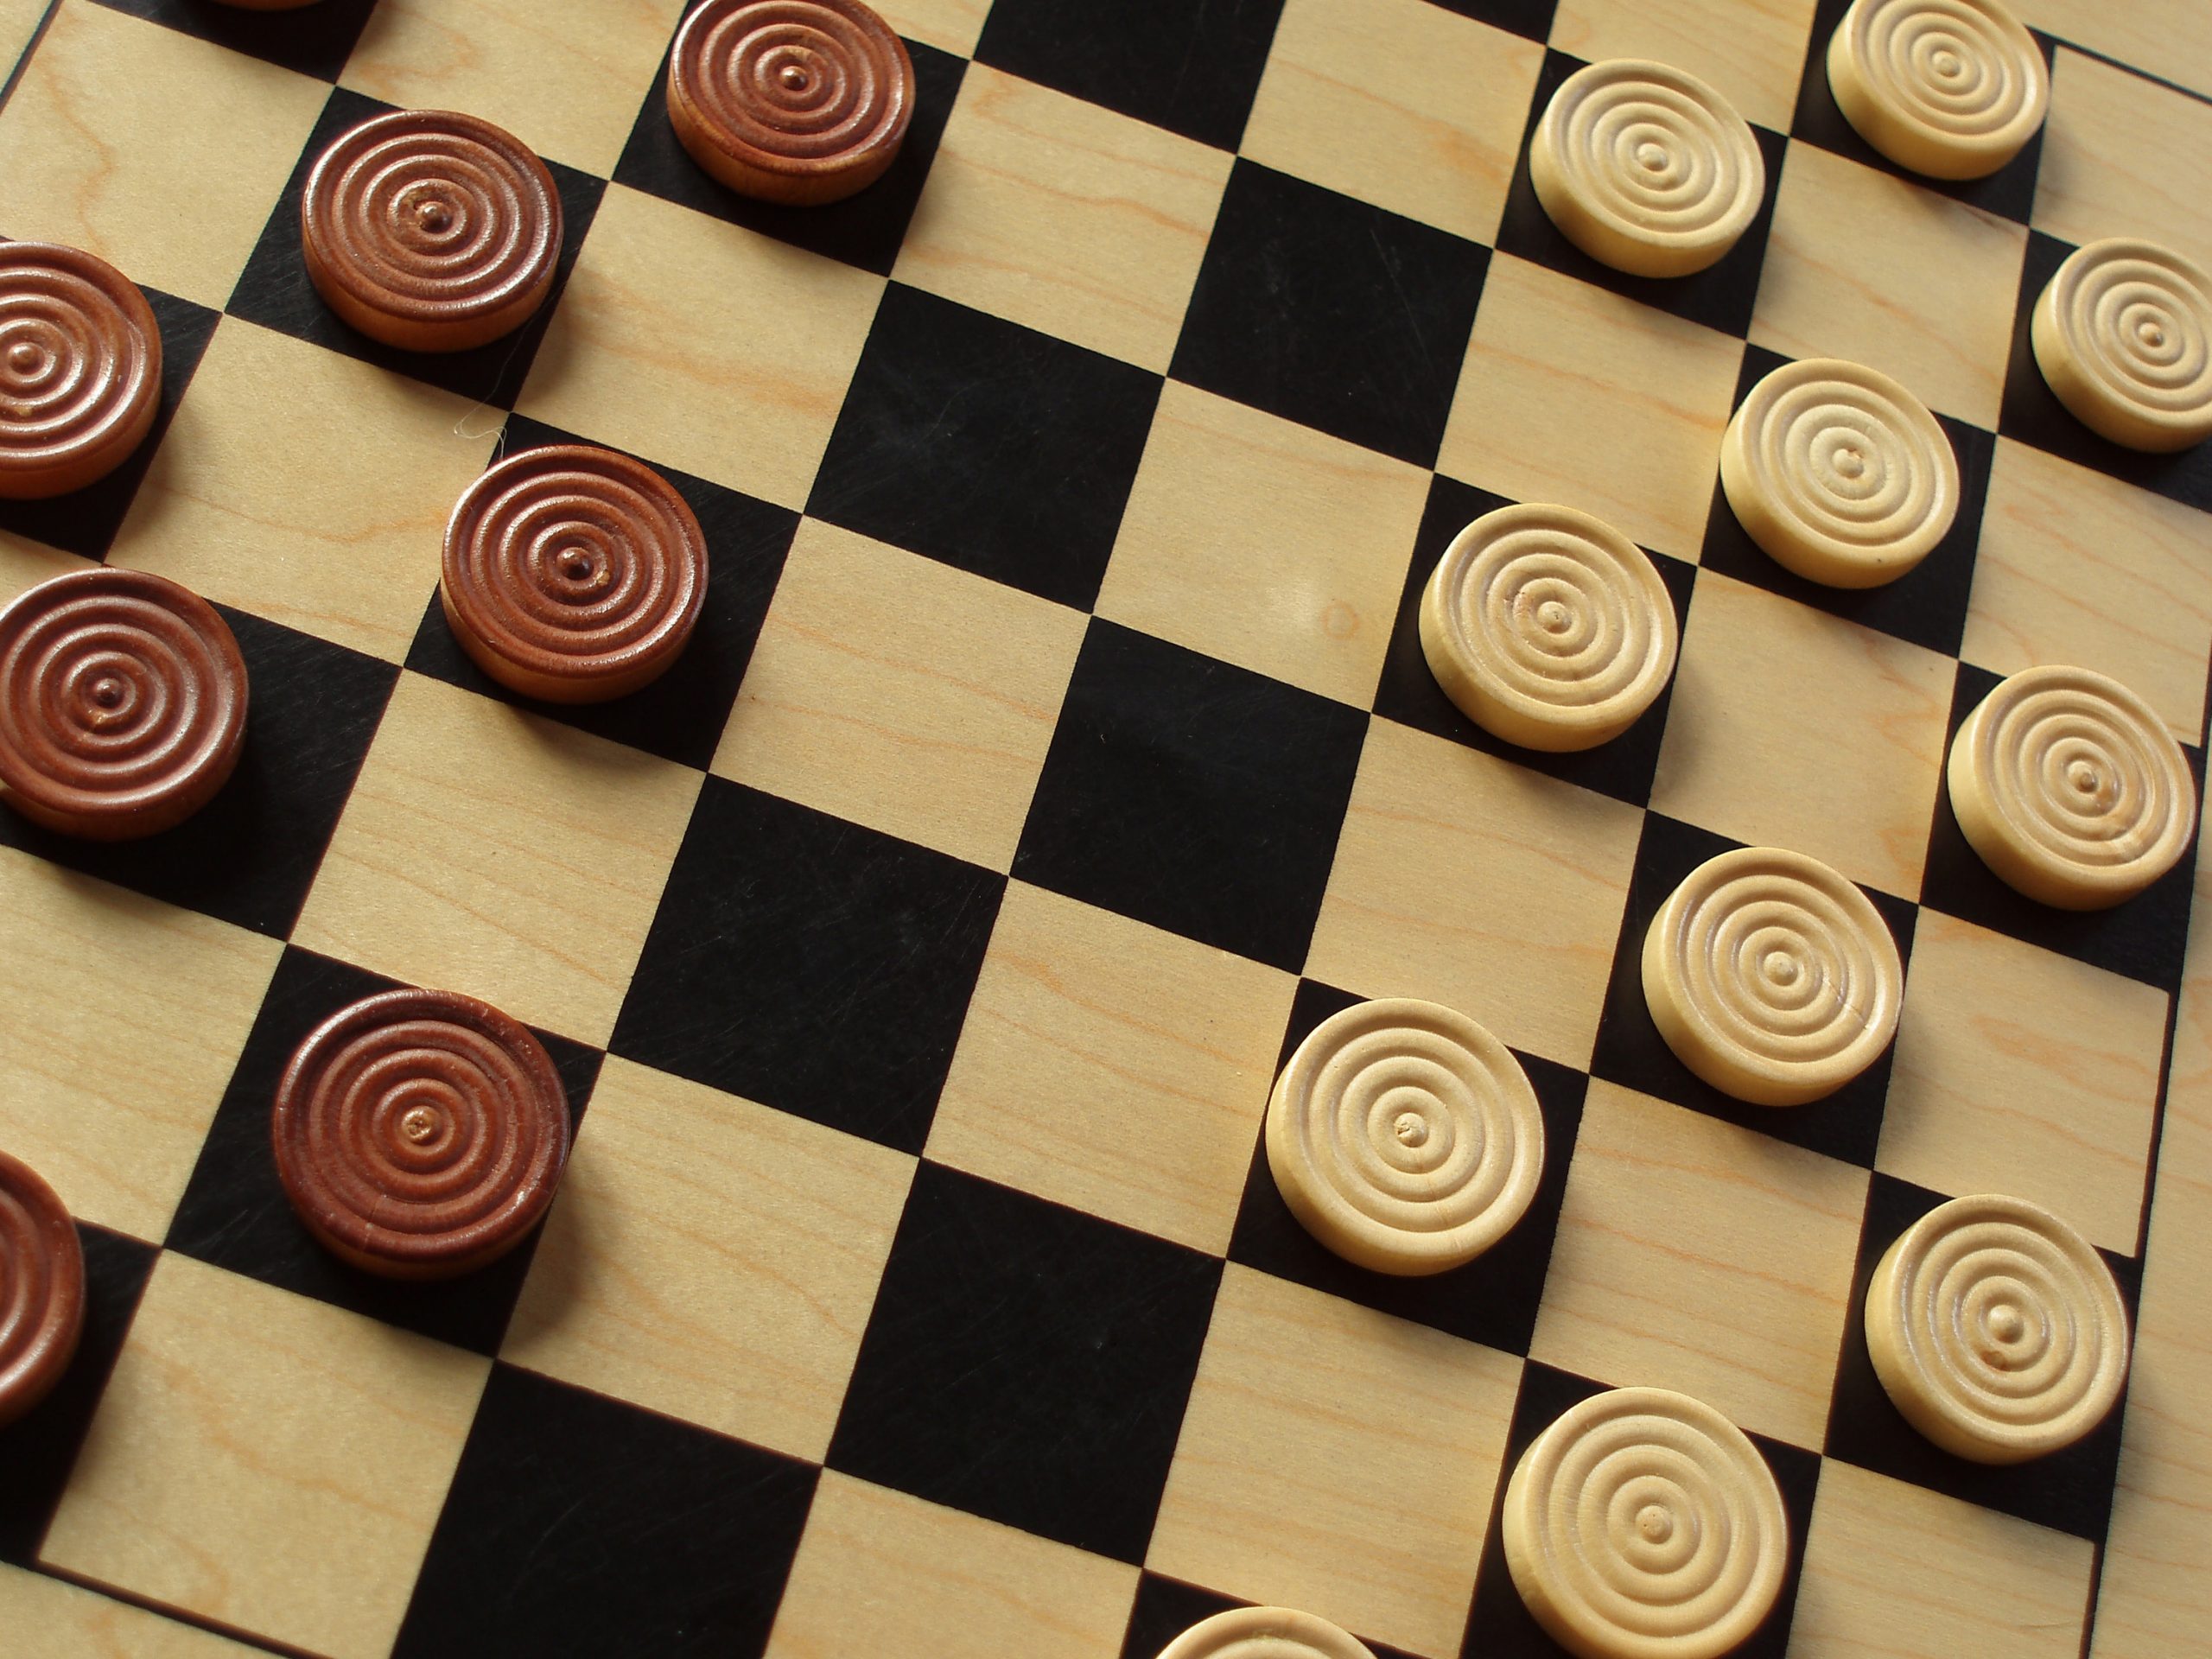 Combinations, chews, creativity – why play checkers?